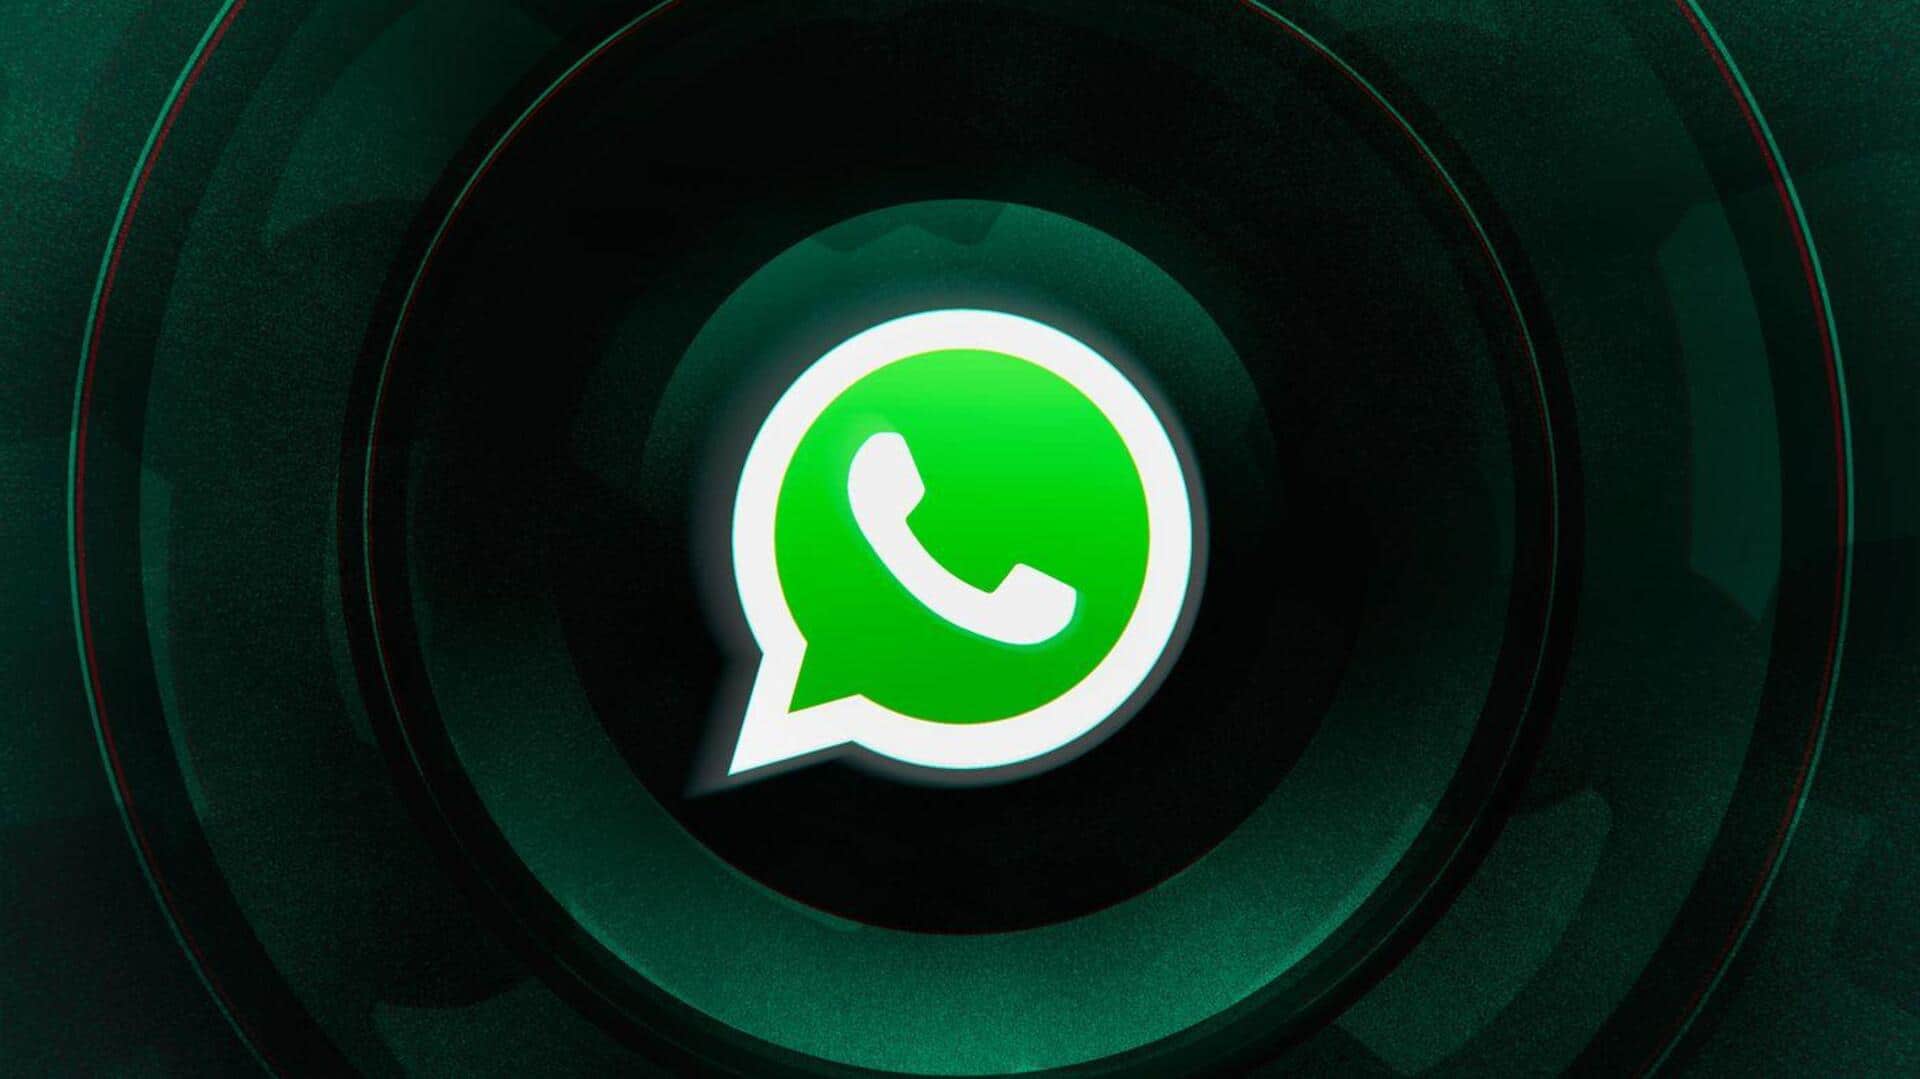 WhatsApp is testing new privacy feature that disables link previews